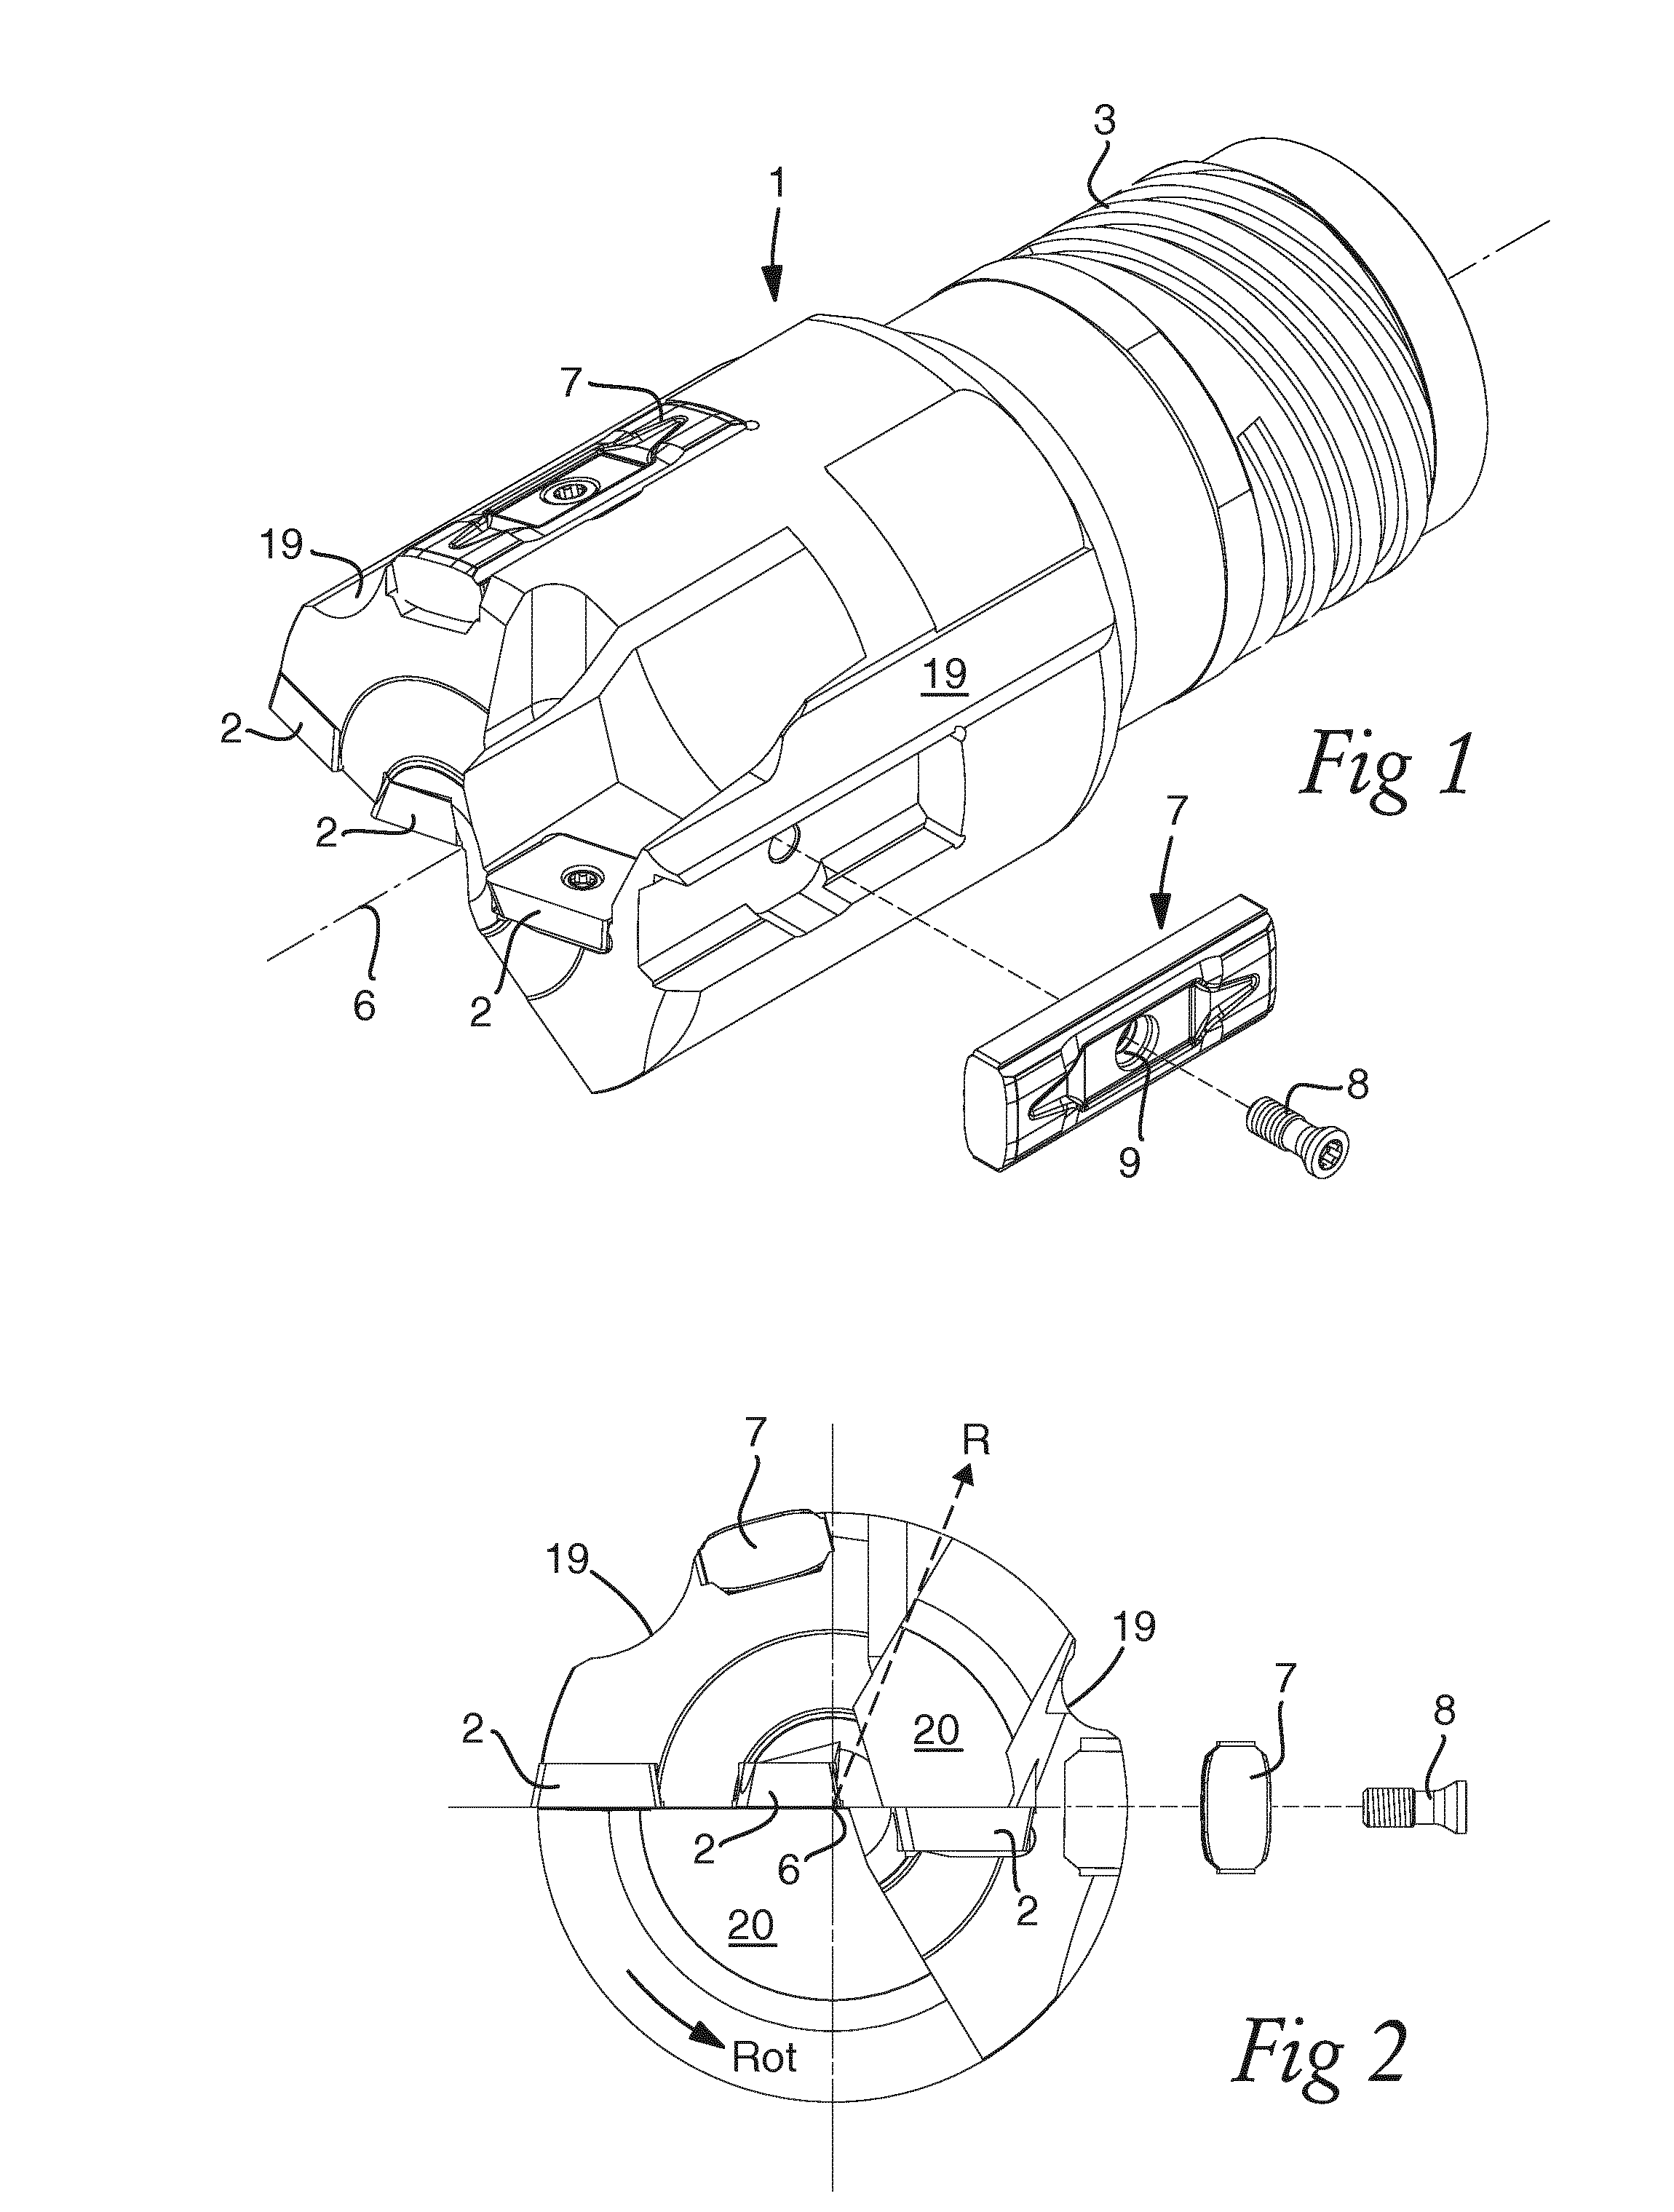 Guide pad and cutter head for a cutting tool